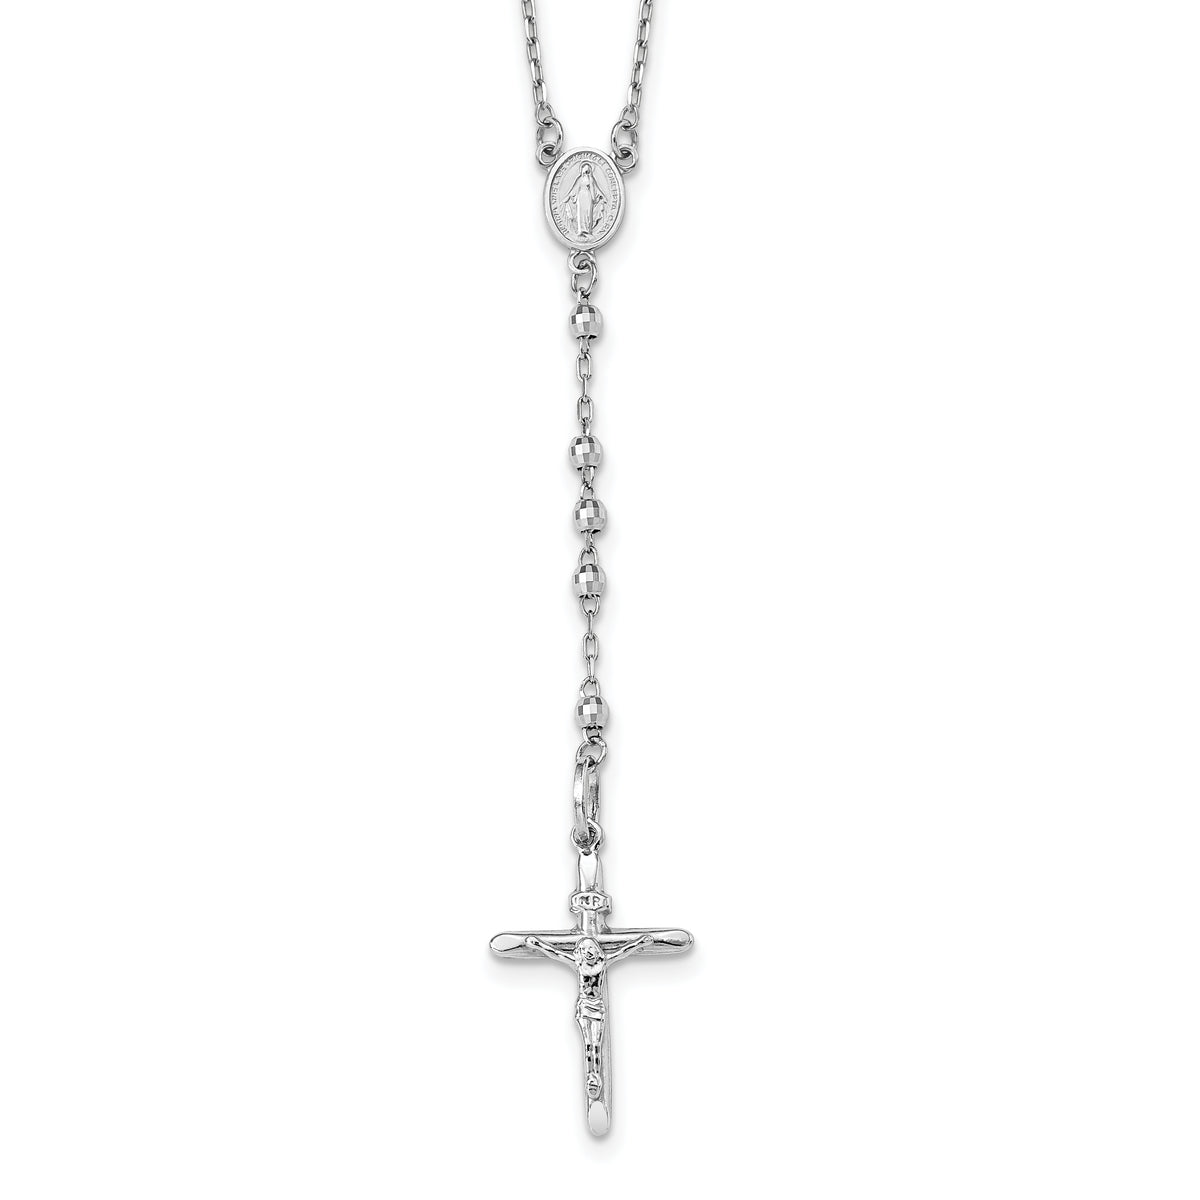 14k White Gold Diamond-cut 3mm Beaded Rosary 24 inch Necklace